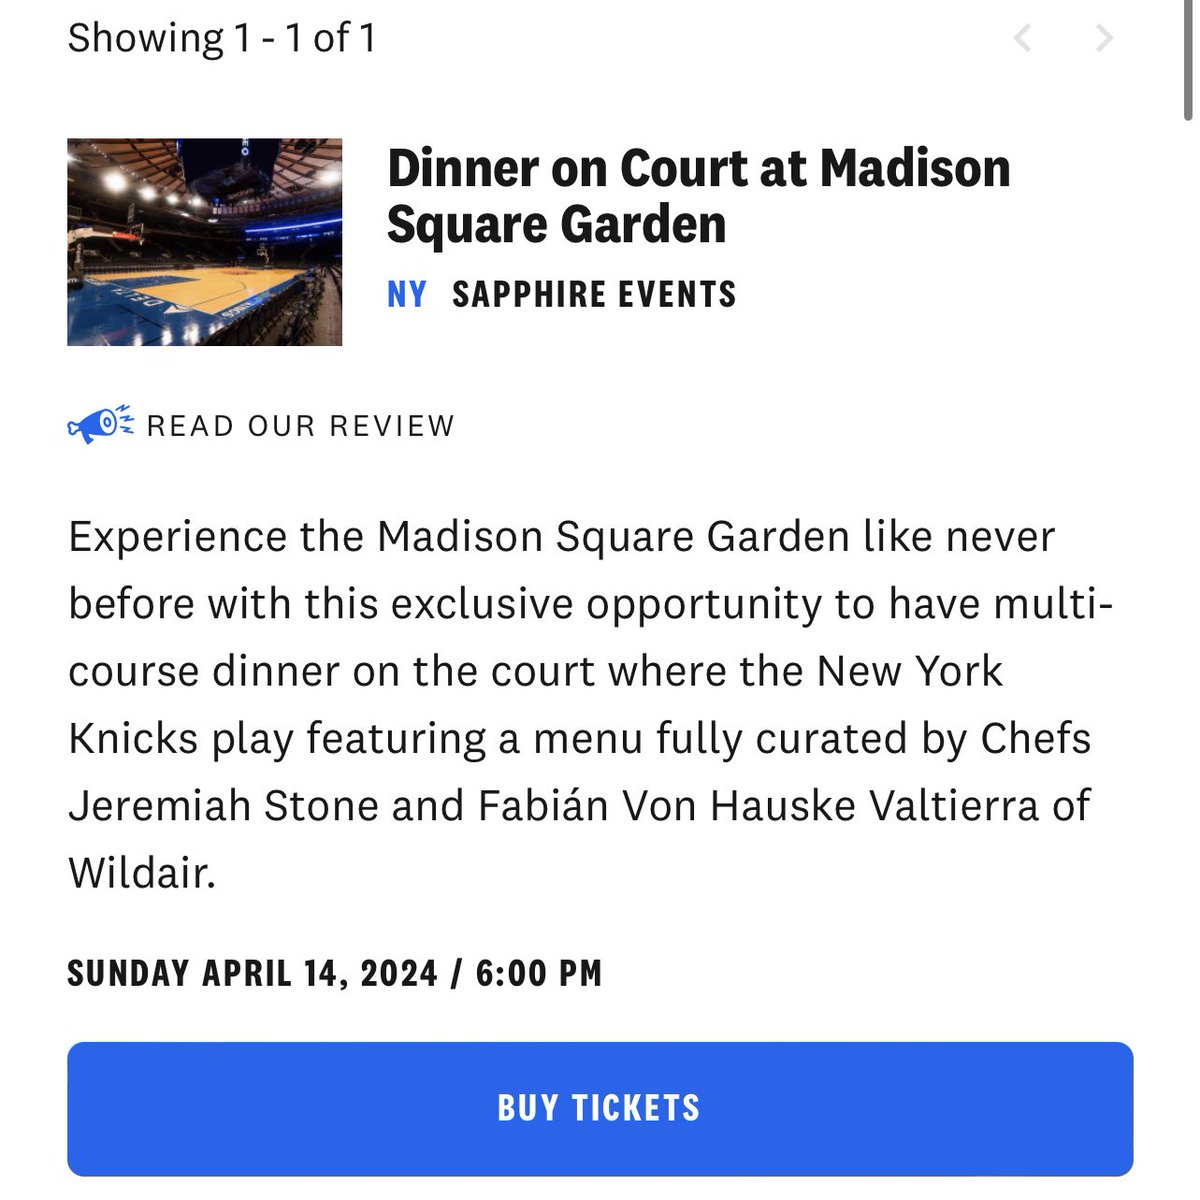 Important intel for Knicks Twitter: We @infatuation + @Chase Sapphire are hosting Dinner on The 🏀 Court @TheGarden on Sun, April 14th. @wildairnyc is cooking, going to be a 🔥 night. Tix are $250 in the Sapphire Ultimate Rewards portal. More info: theinfatuation.com/experiences